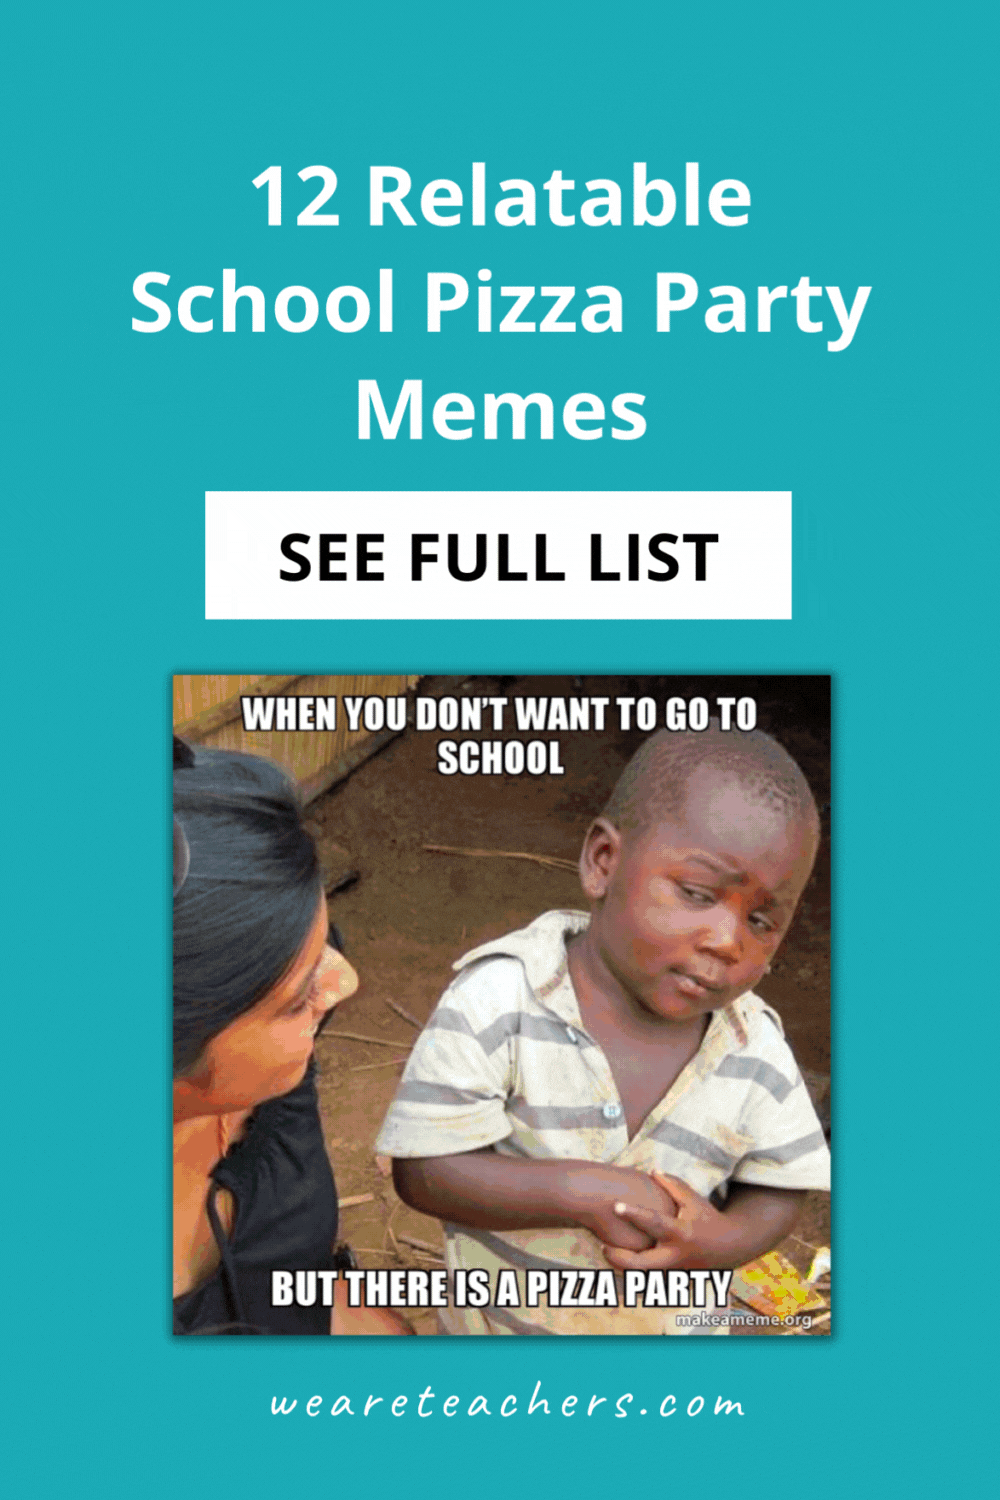 The most relatable school pizza party memes about the best incentive you could possibly give to your classroom.